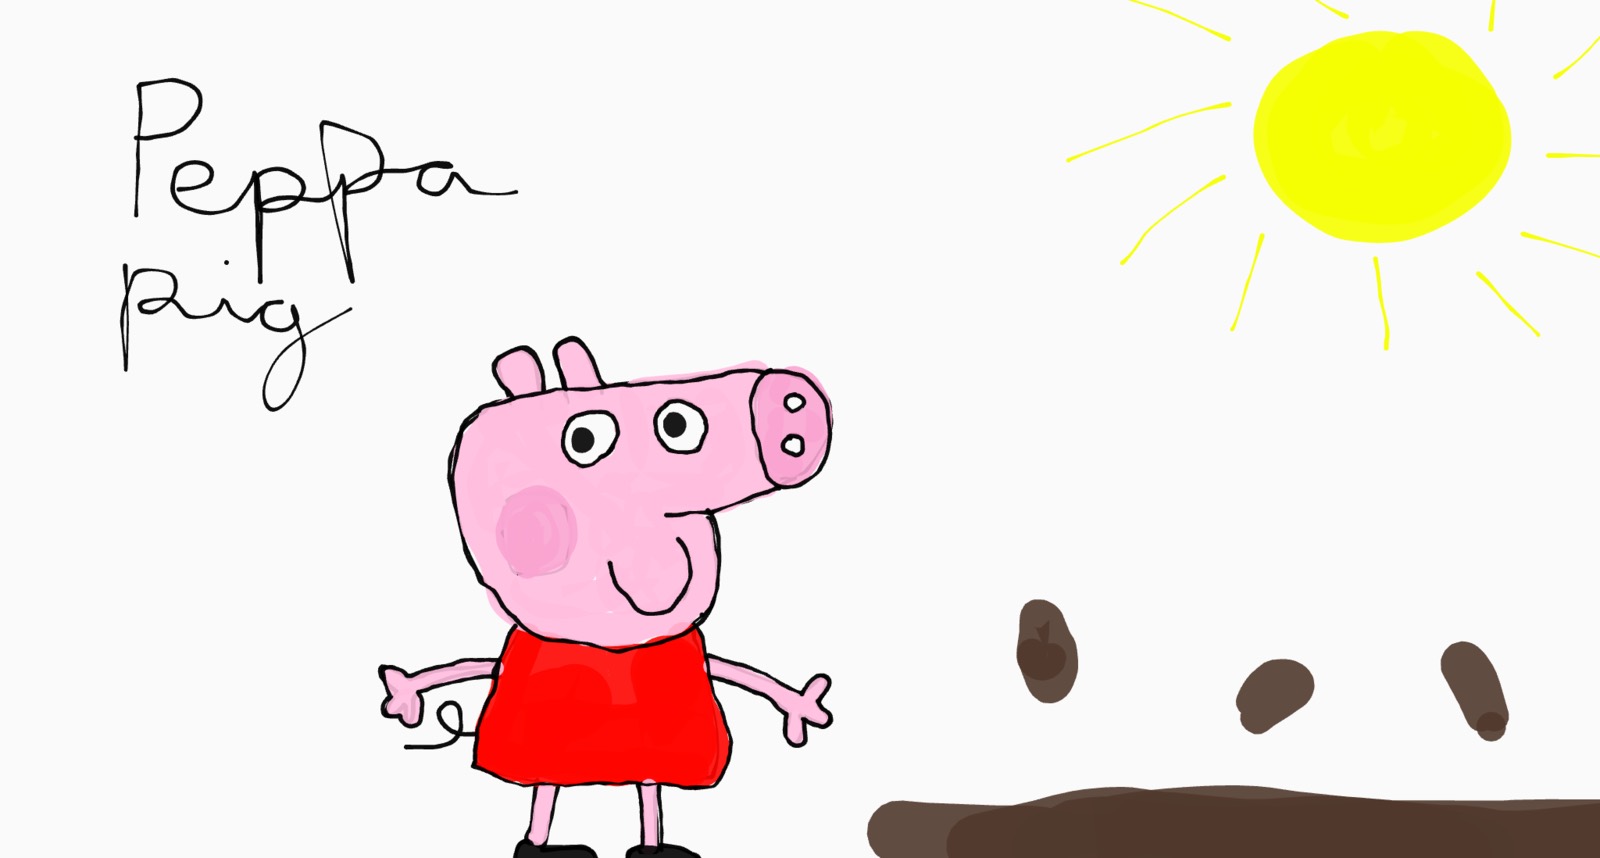 New series of Peppa Pig in the works